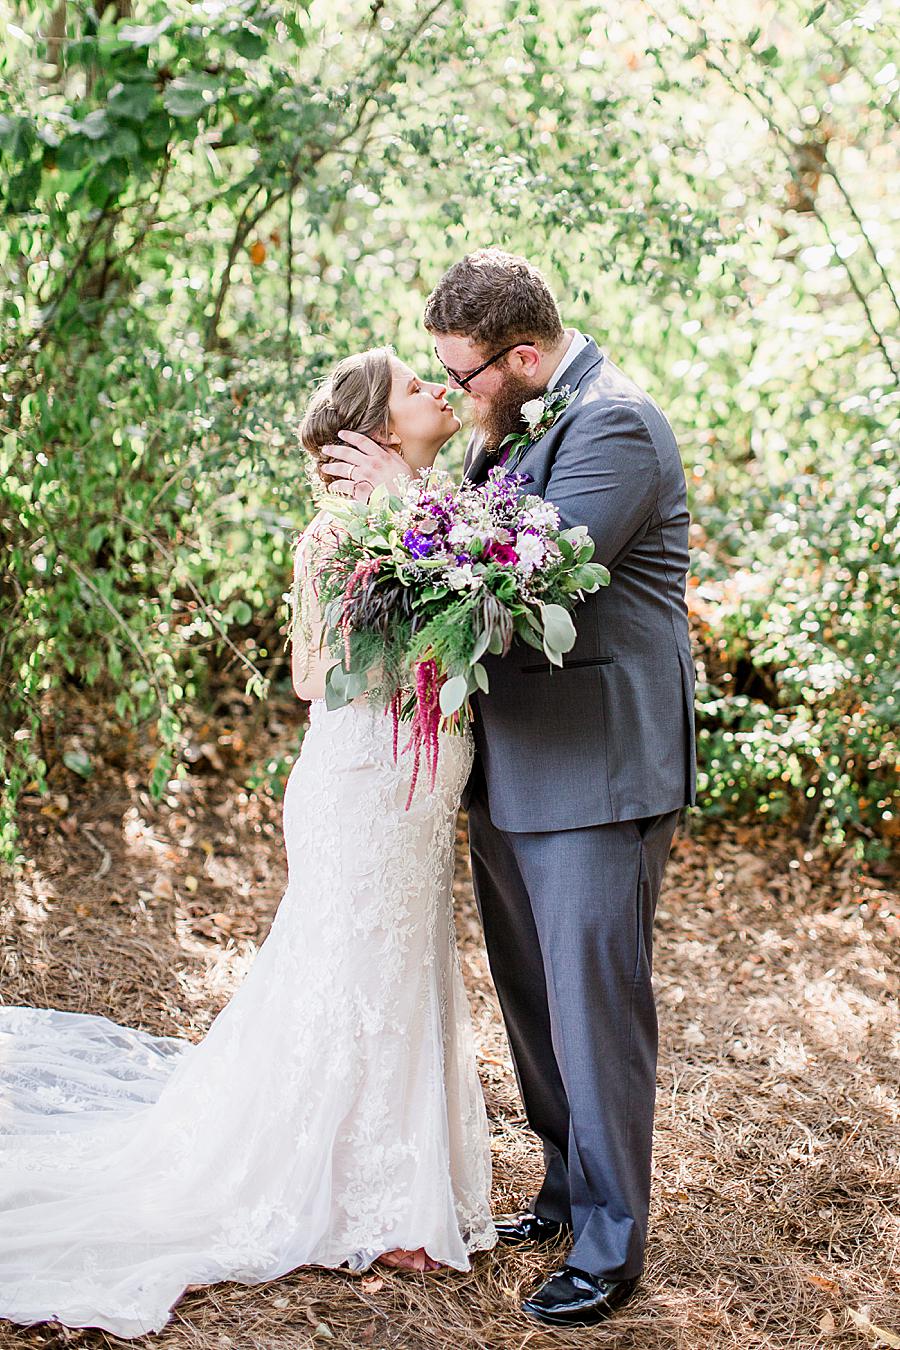 Just married at this Hunter Valley Pavilion wedding by Knoxville Wedding Photographer, Amanda May Photos.